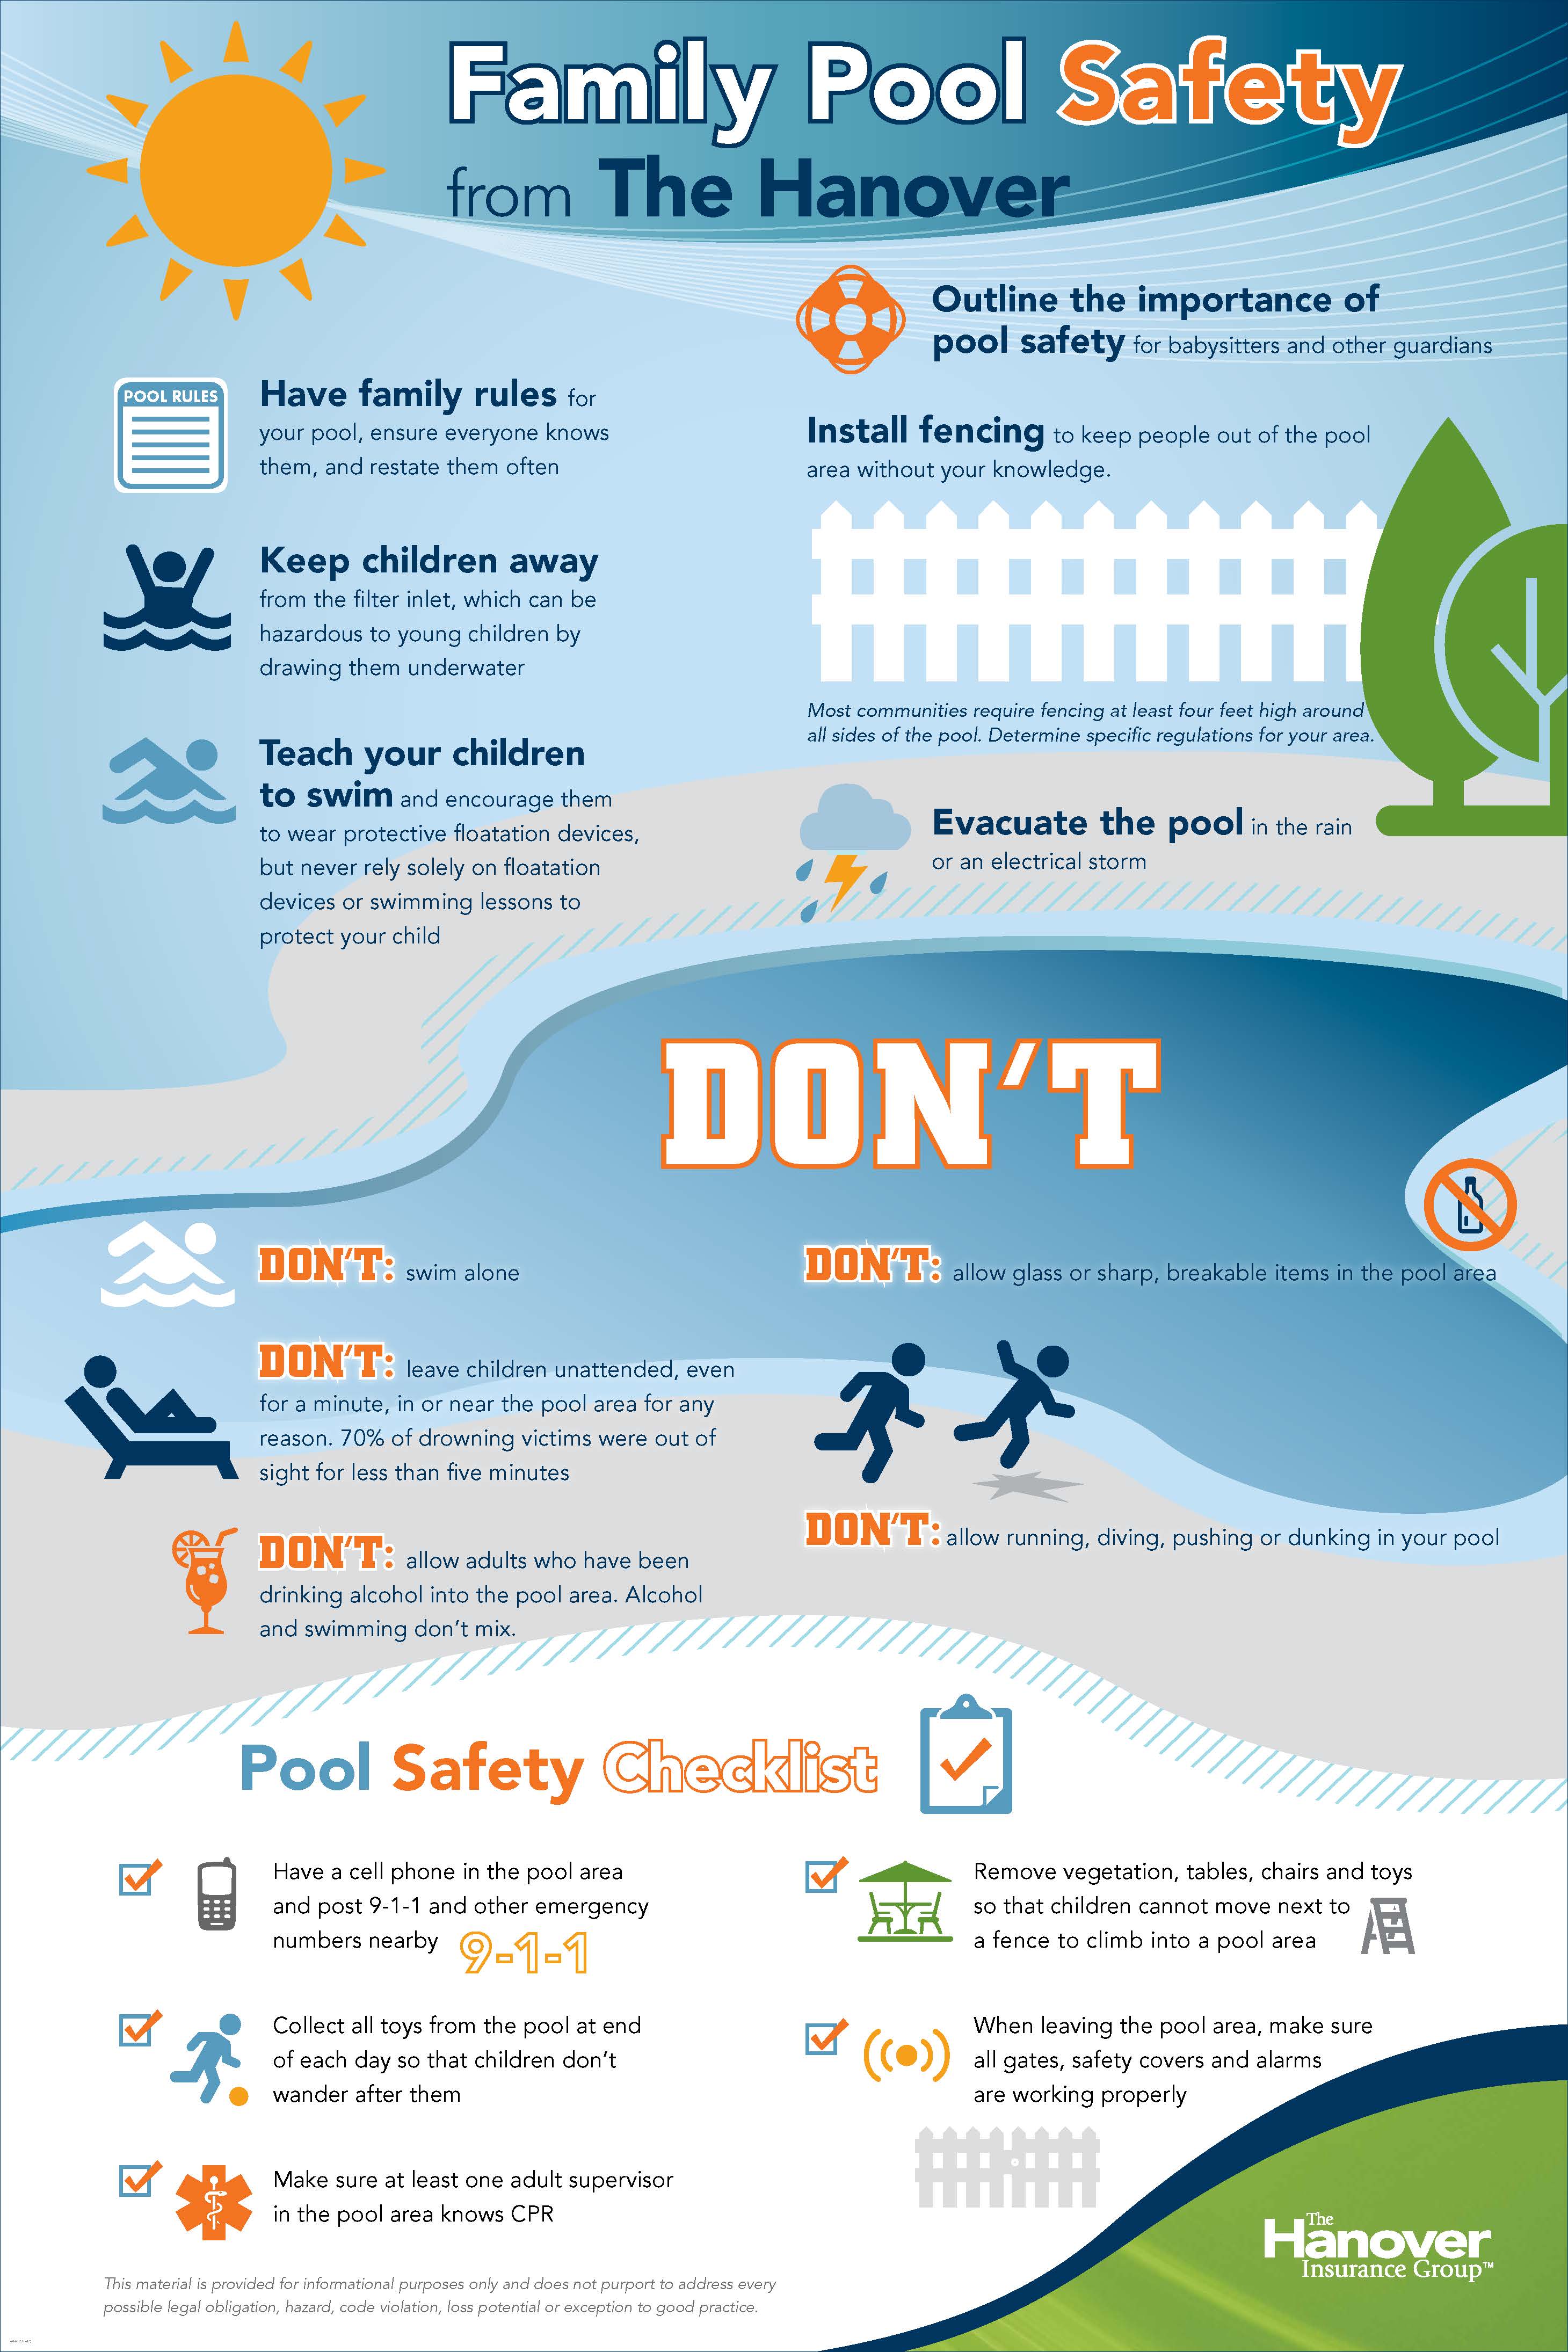 info graphic showing pool side safety tips